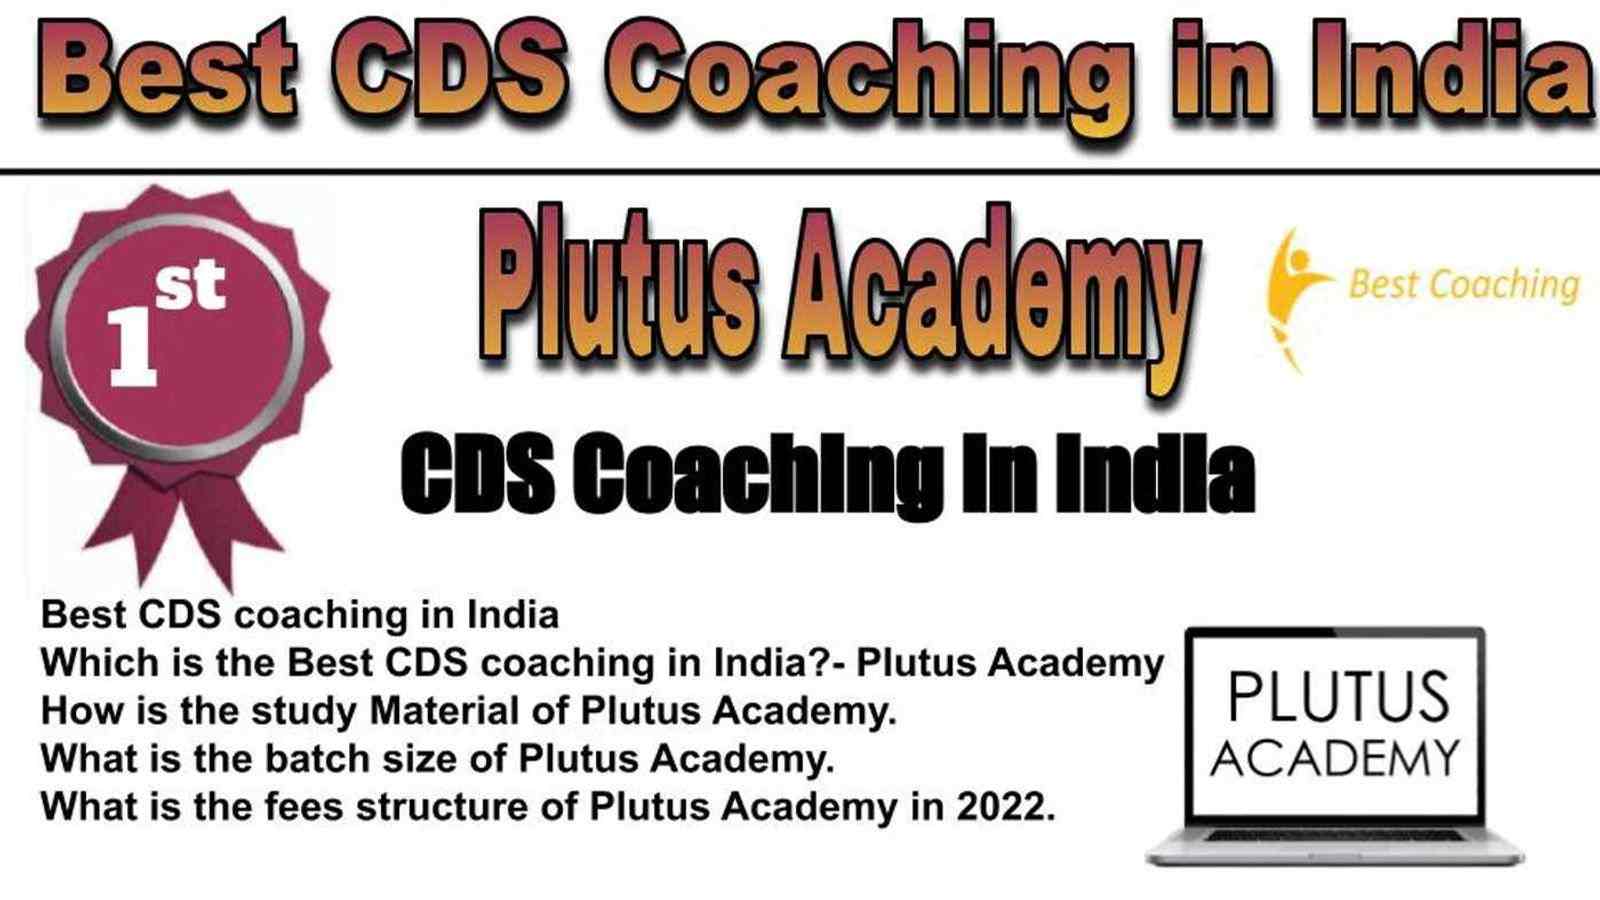 Rank 1 Best CDS Coaching in India